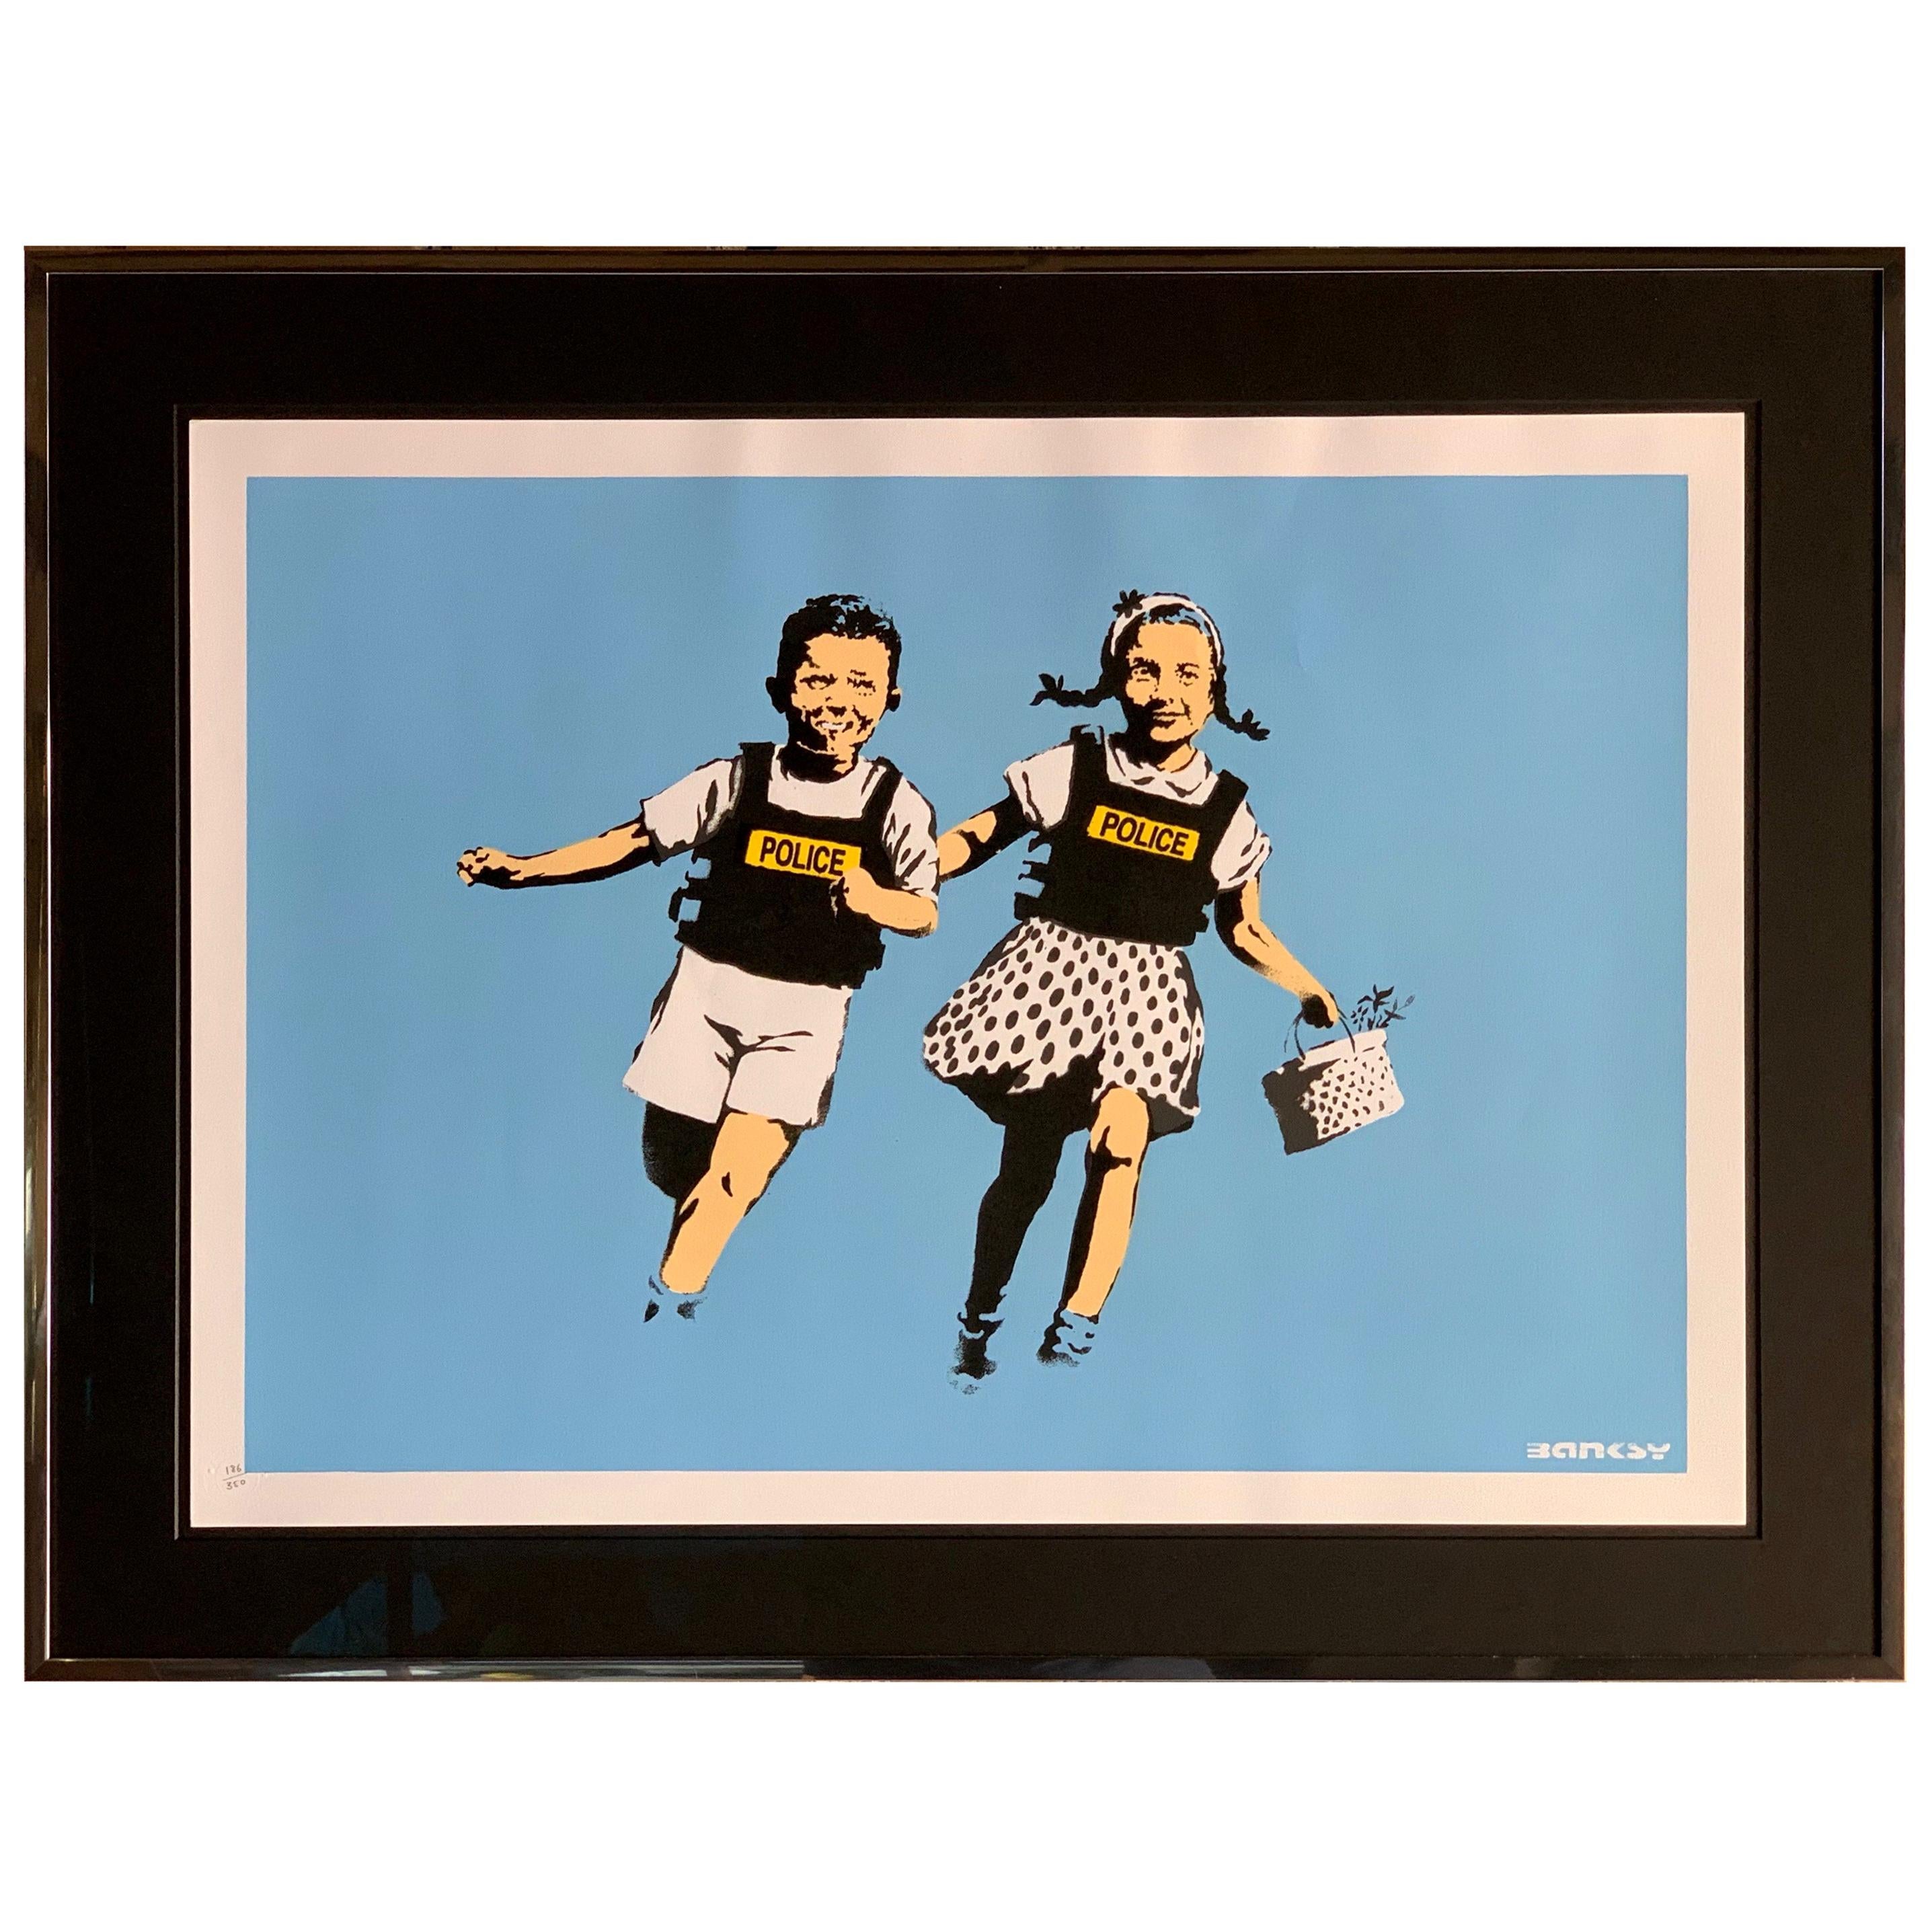 Banksy Jack and Jill, 2005 Unsigned